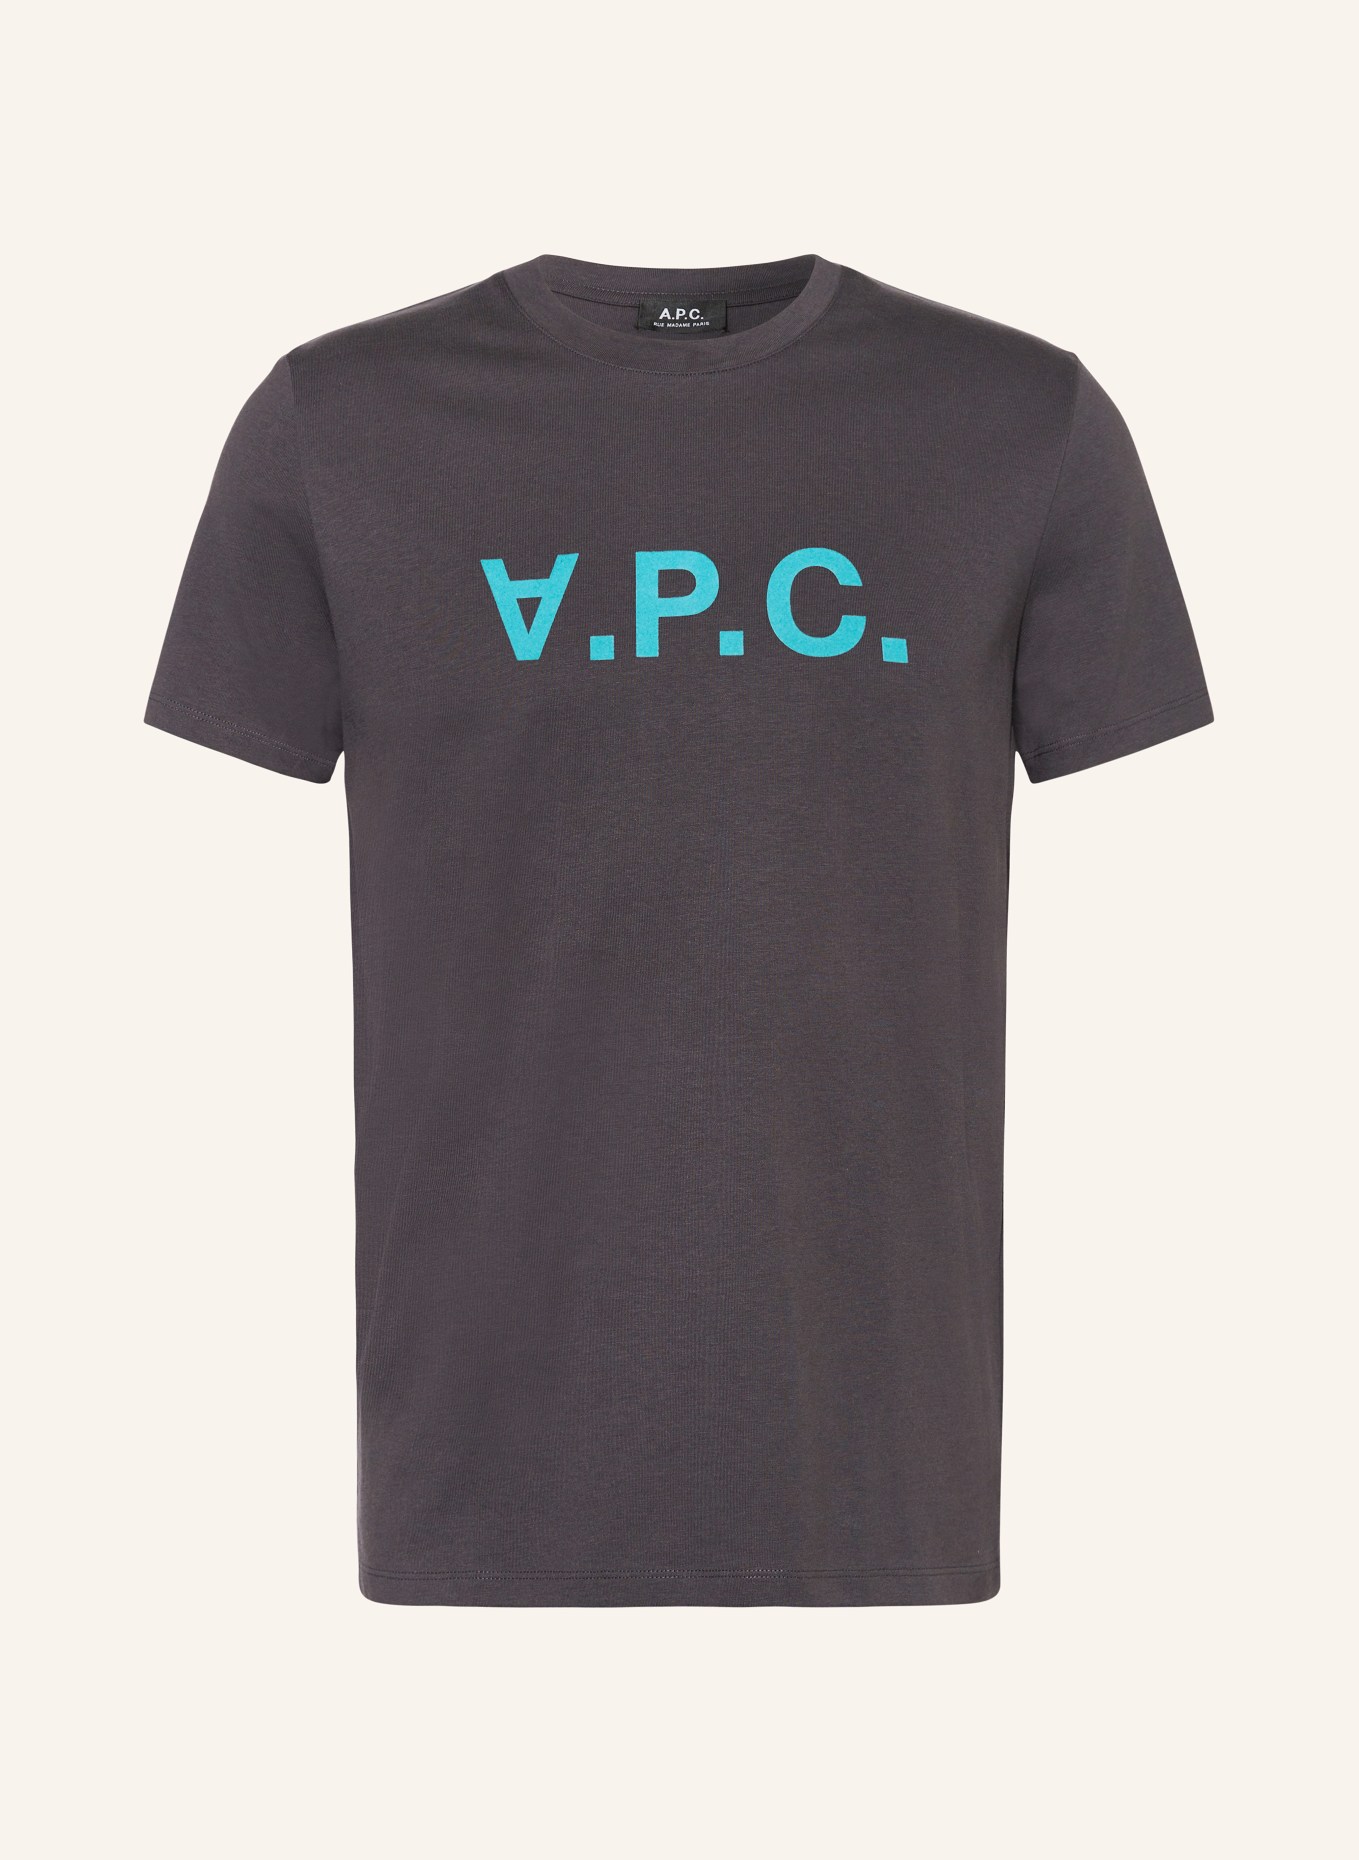 A.P.C. T-shirt, Color: DARK GRAY/ TURQUOISE (Image 1)